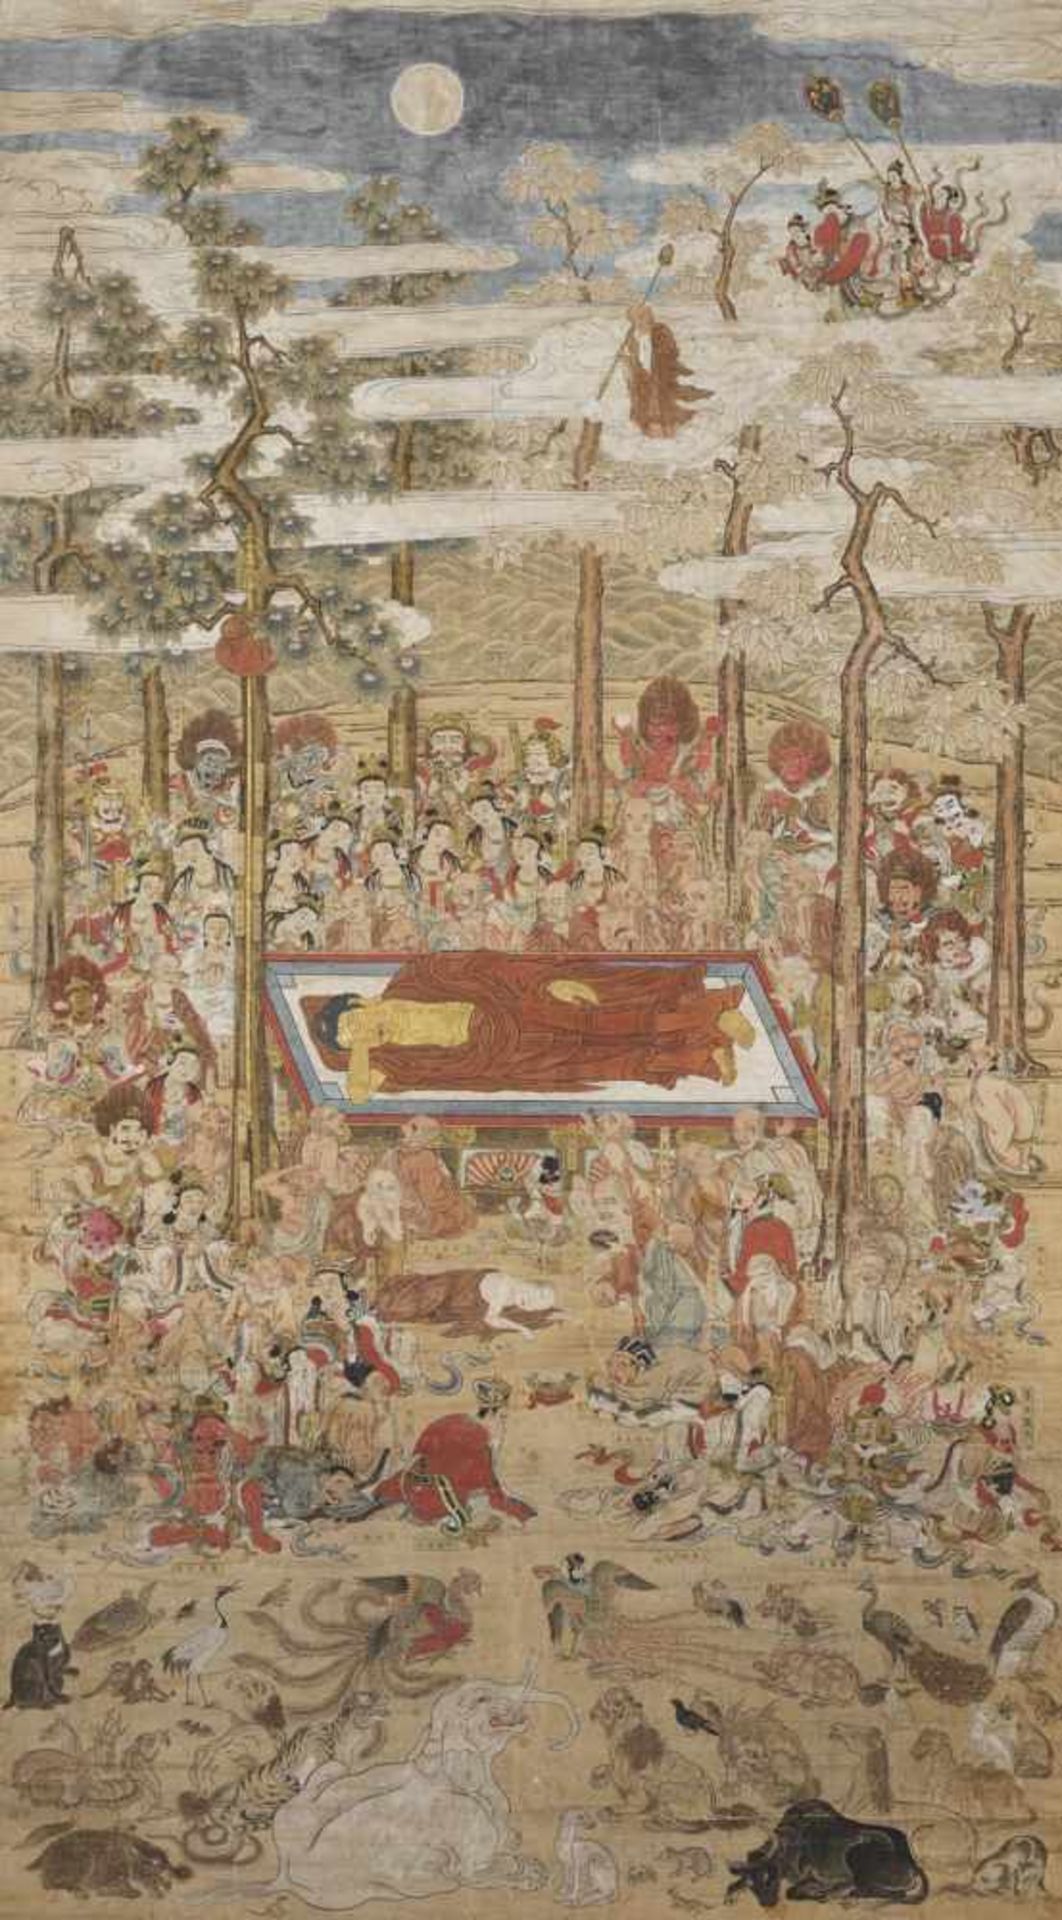 A VERY LARGE AND IMPORTANT PAINTED WOODCUT PRINT DEPICTING THE DEATH OF BUDDHA (NEHANZU) Japan,